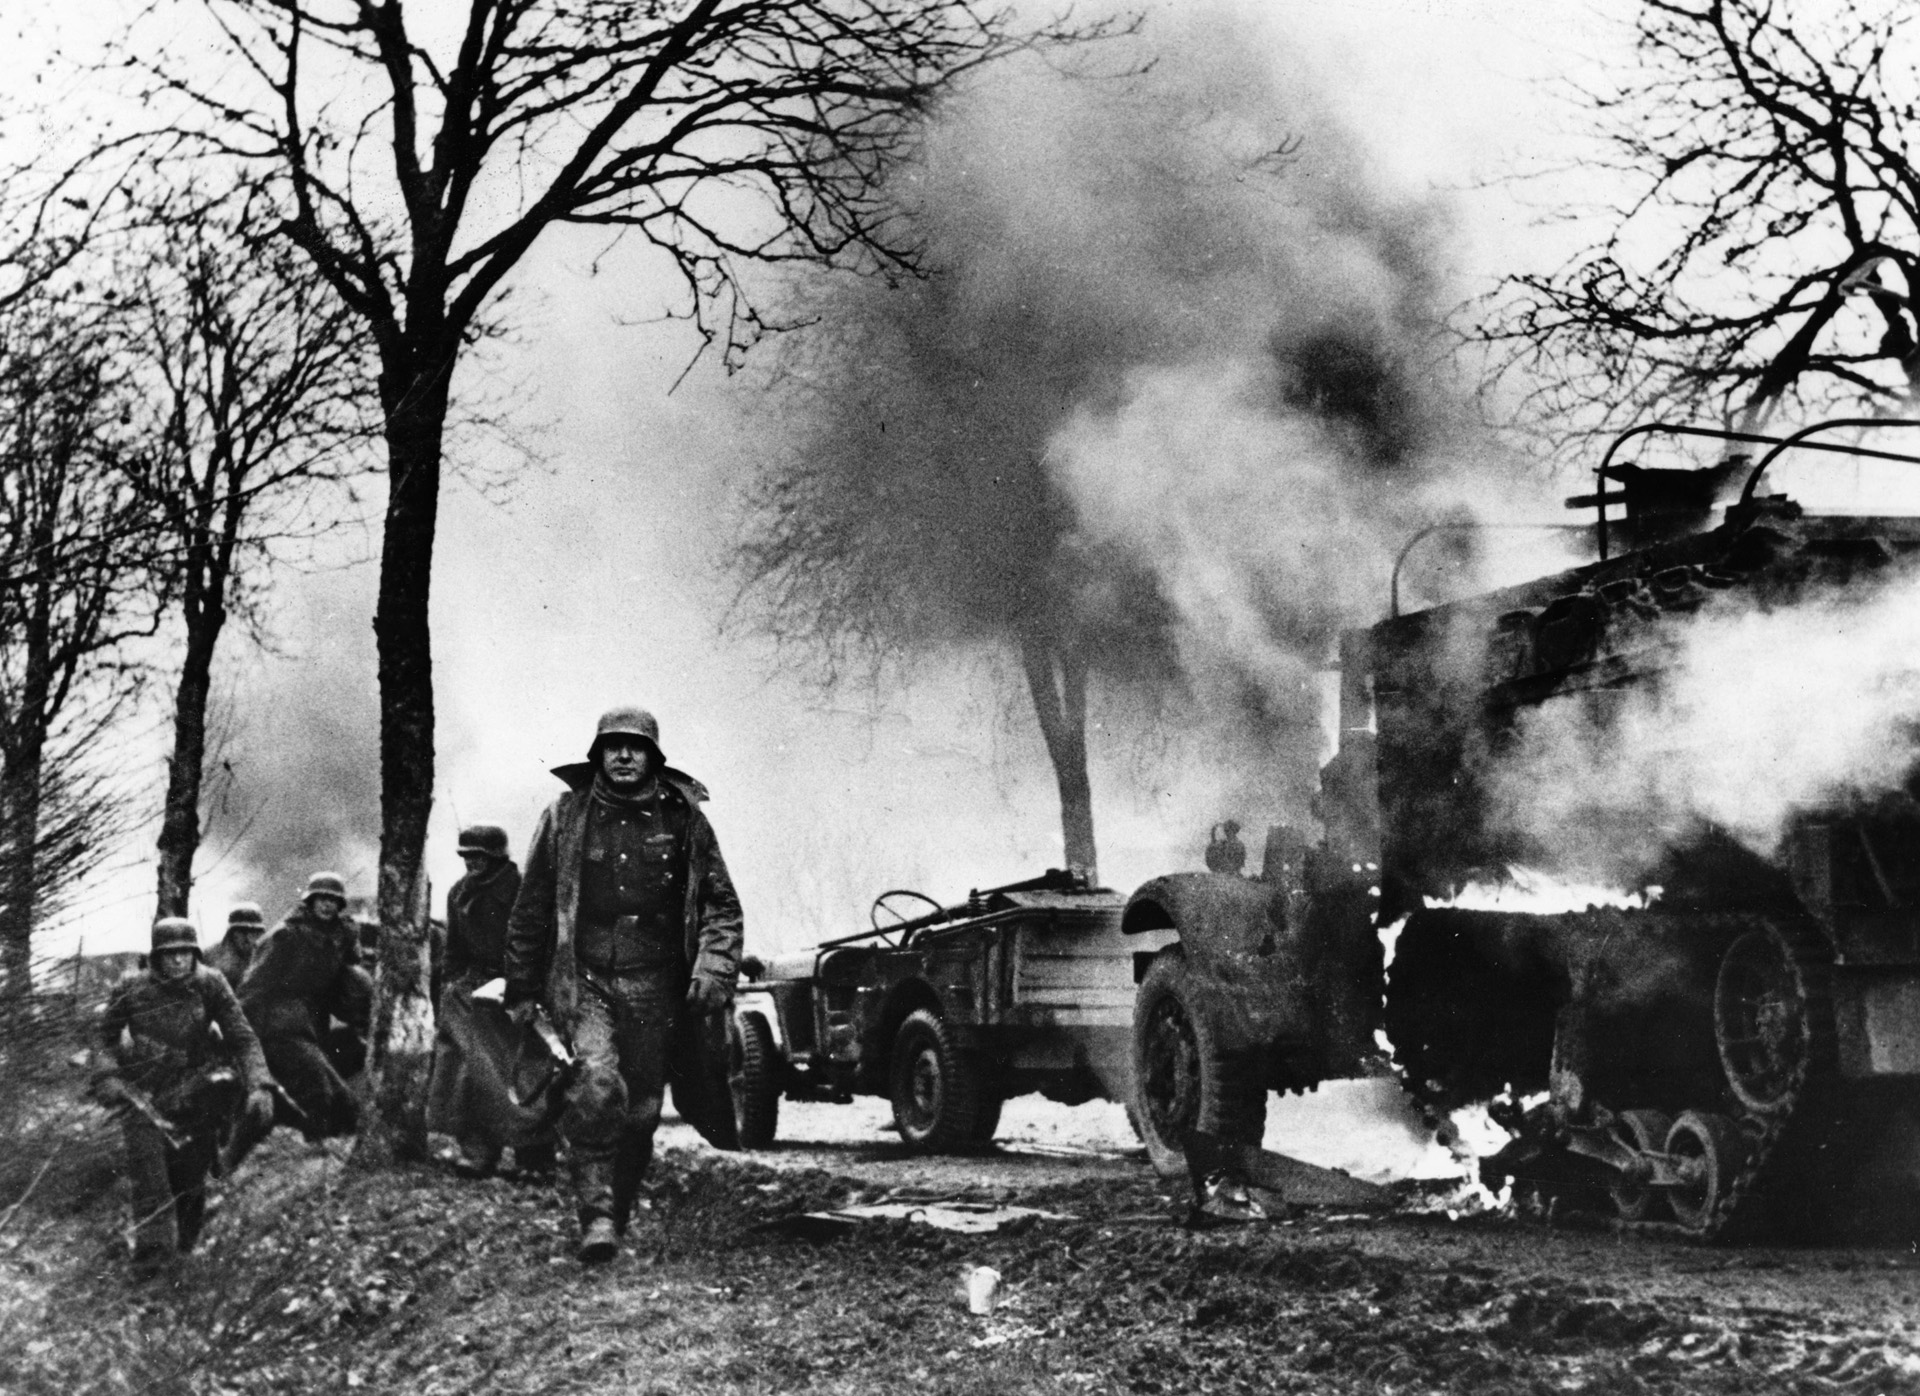 German soldiers of Kampfgruppe Hansen, one of them carrying an assault rifle, advance past burning vehicles of the U.S. 14th Mechanized Cavalry Group. The American column had been overwhelmed minutes before this photo was taken, and the image is from four rolls of film captured from a German soldier during subsequent fighting.